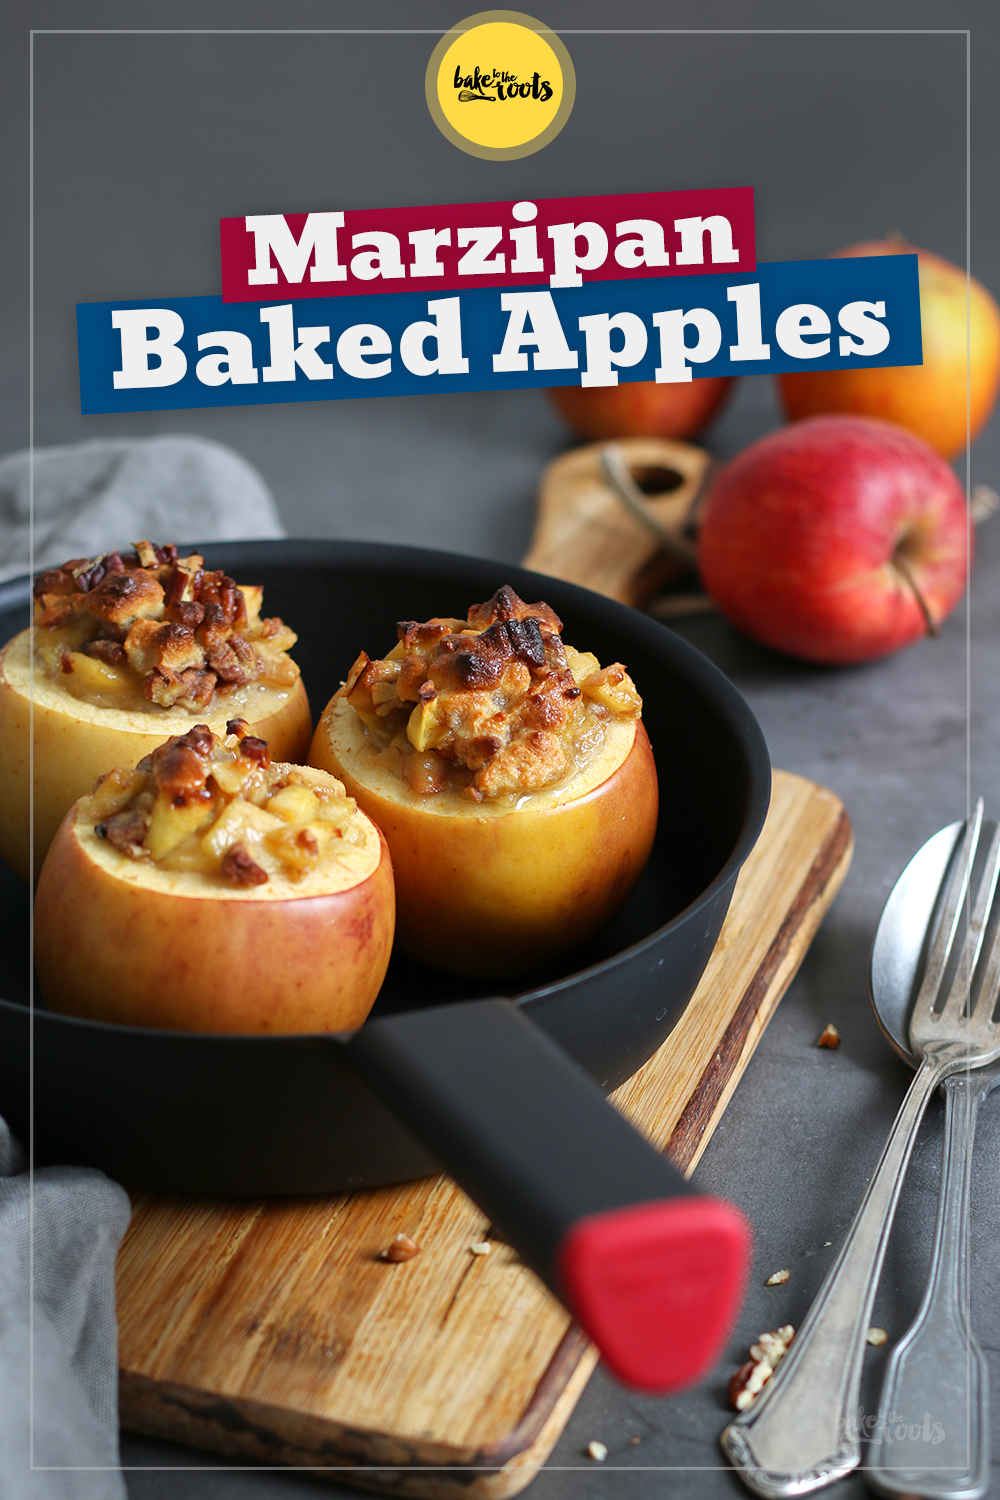 Baked Apples with Marzipan & Pecans | Bake to the roots